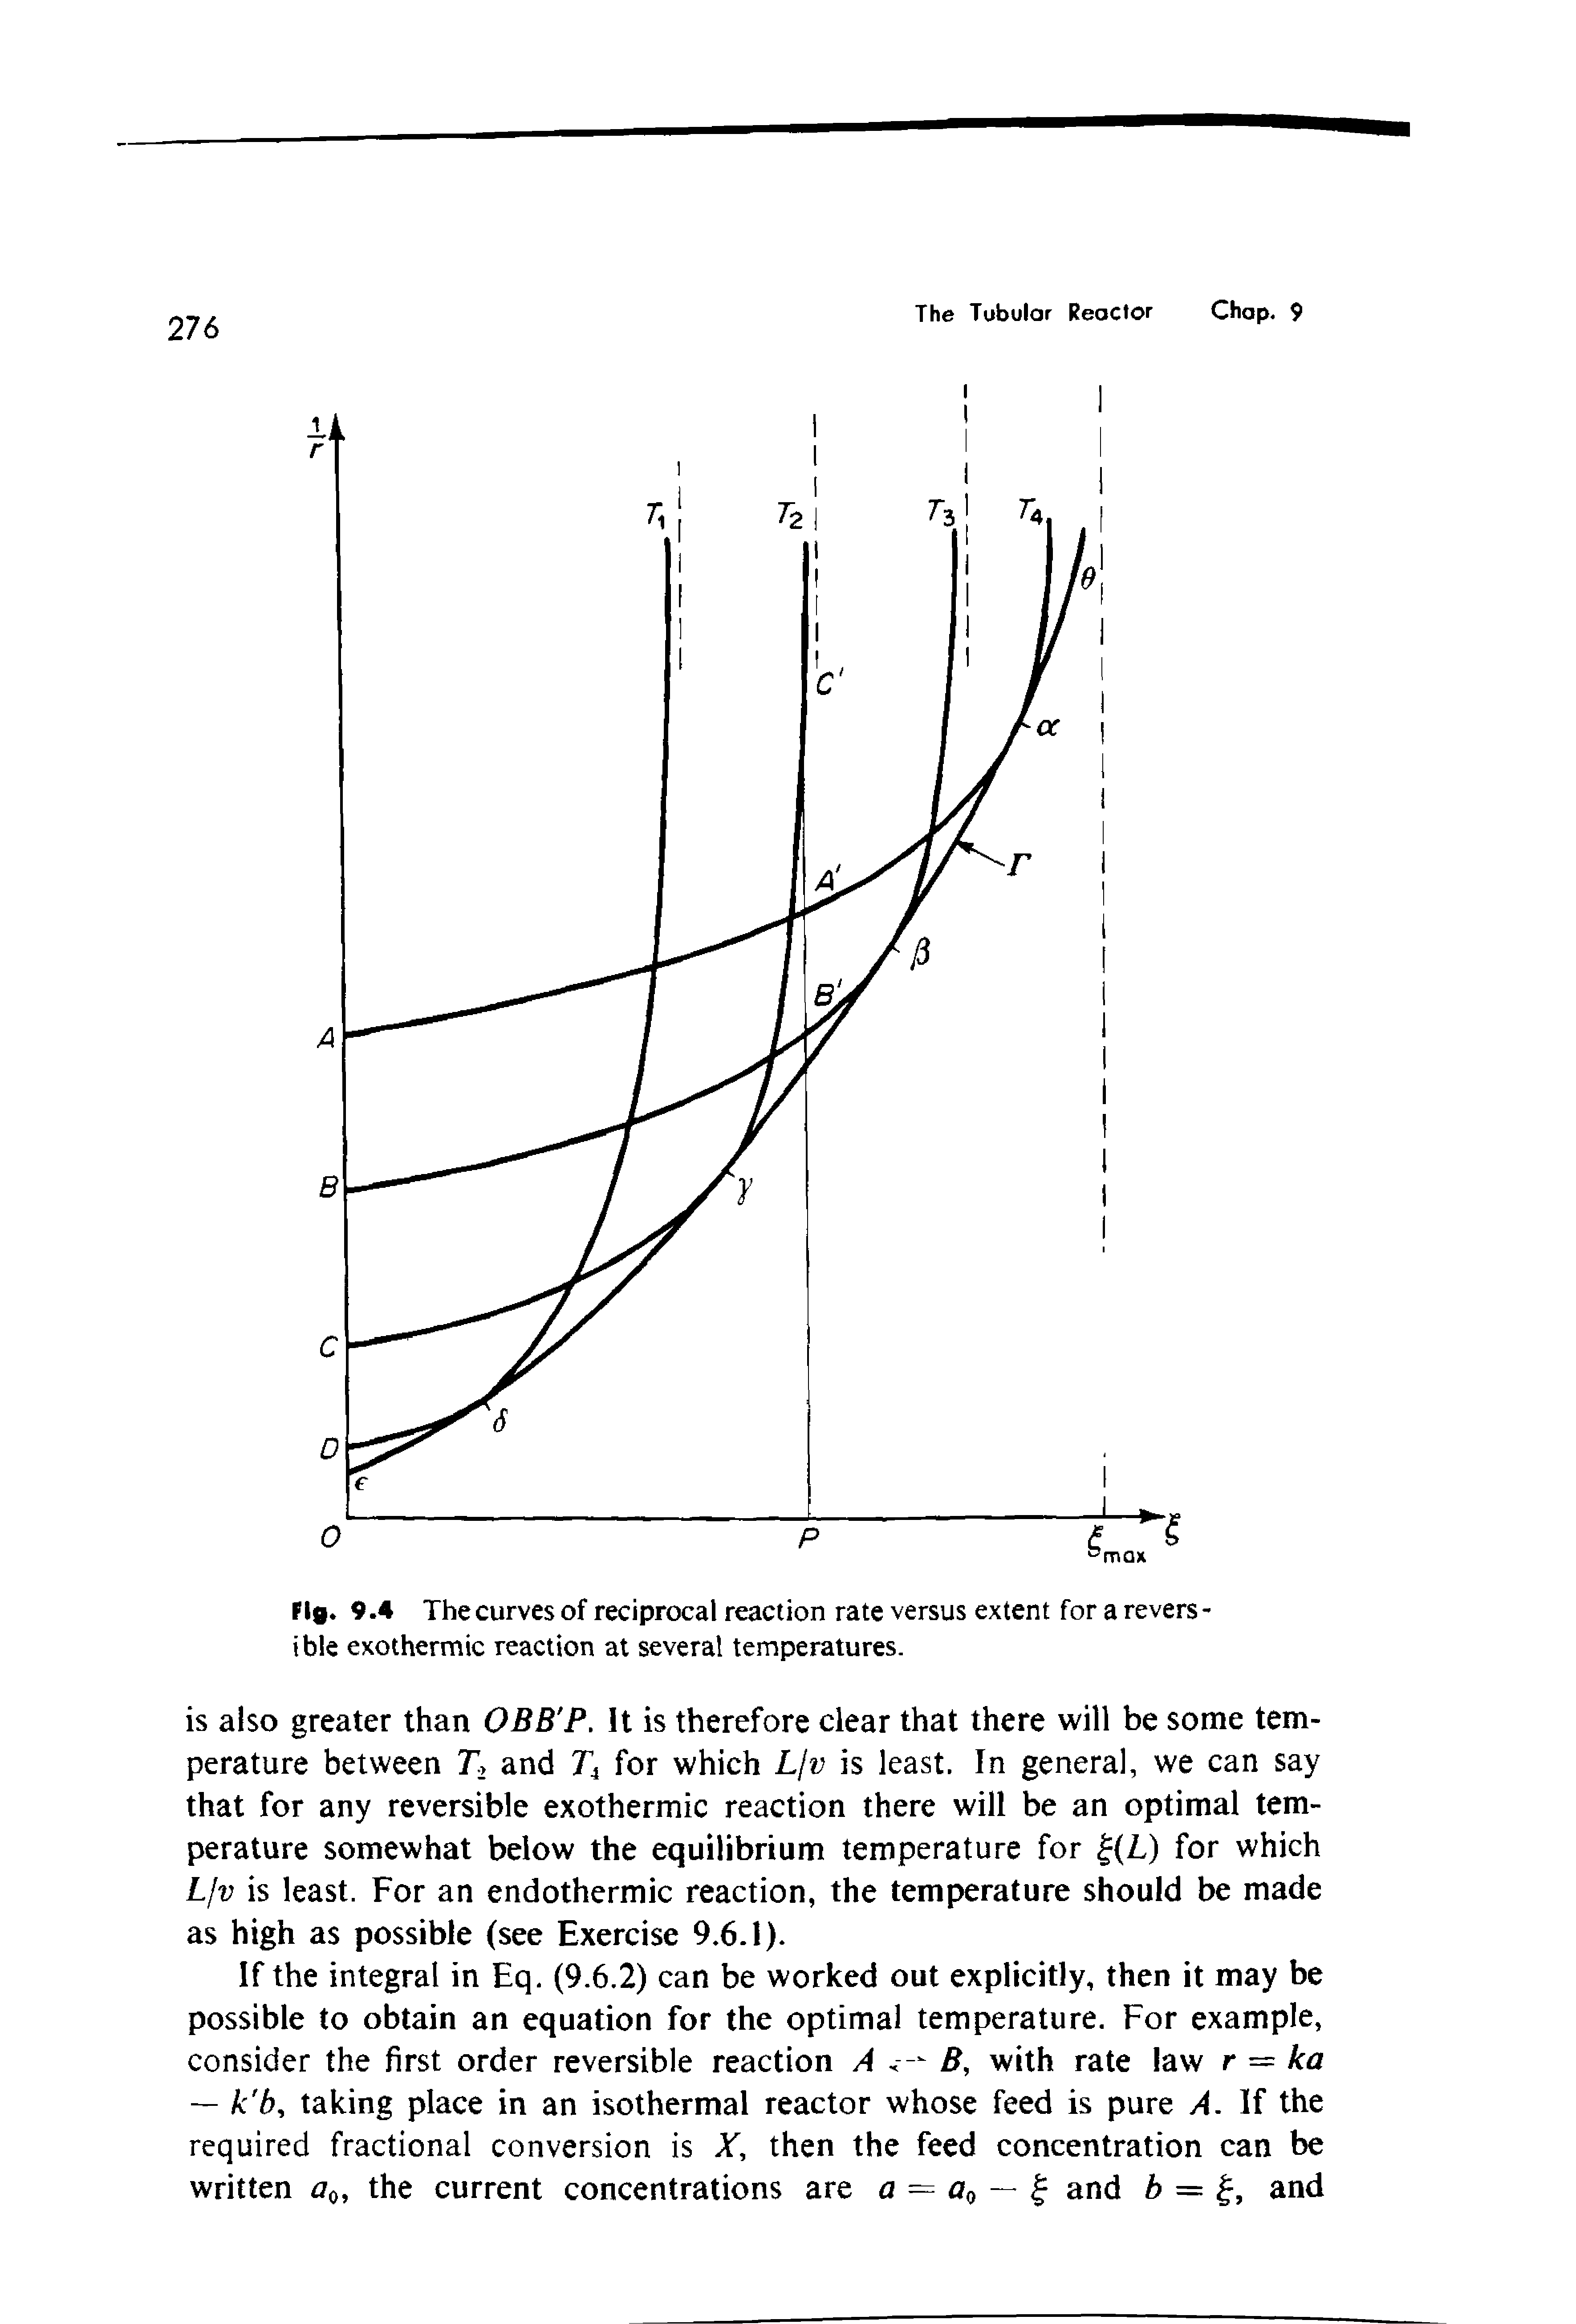 Fig. 9.4 The curves of reciprocal reaction rate versus extent for a reversible exothermic reaction at several temperatures.